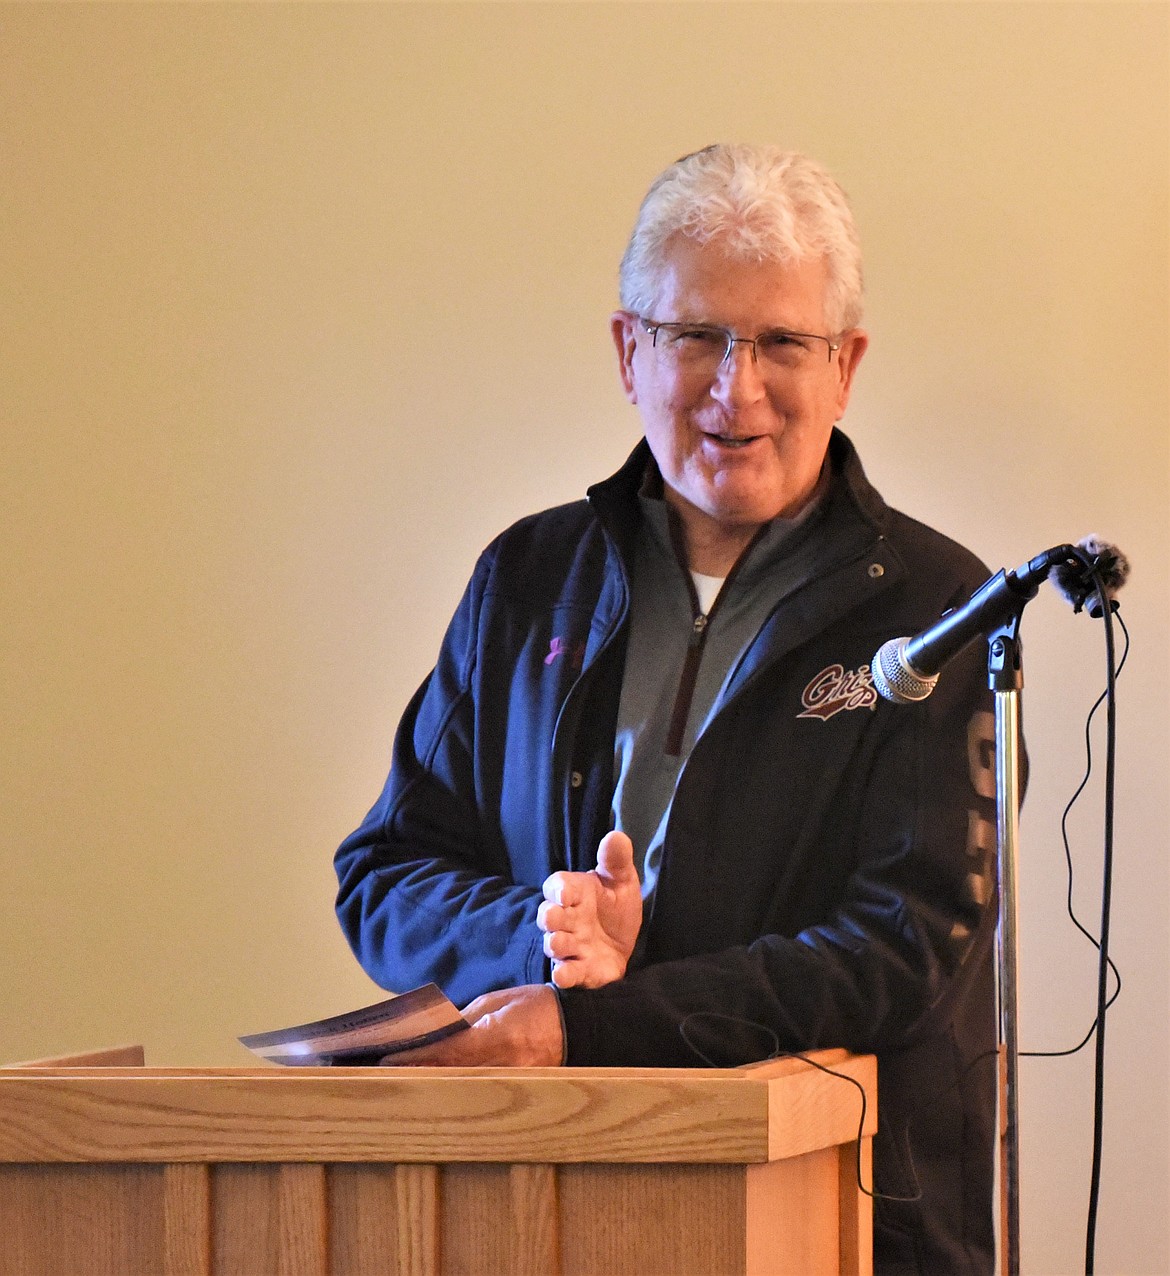 Retired University of Montana Associate Athletic Director Gary Hughes speaks during a memorial service for Mick Holien in Polson. (Scot Heisel/Lake County Leader)